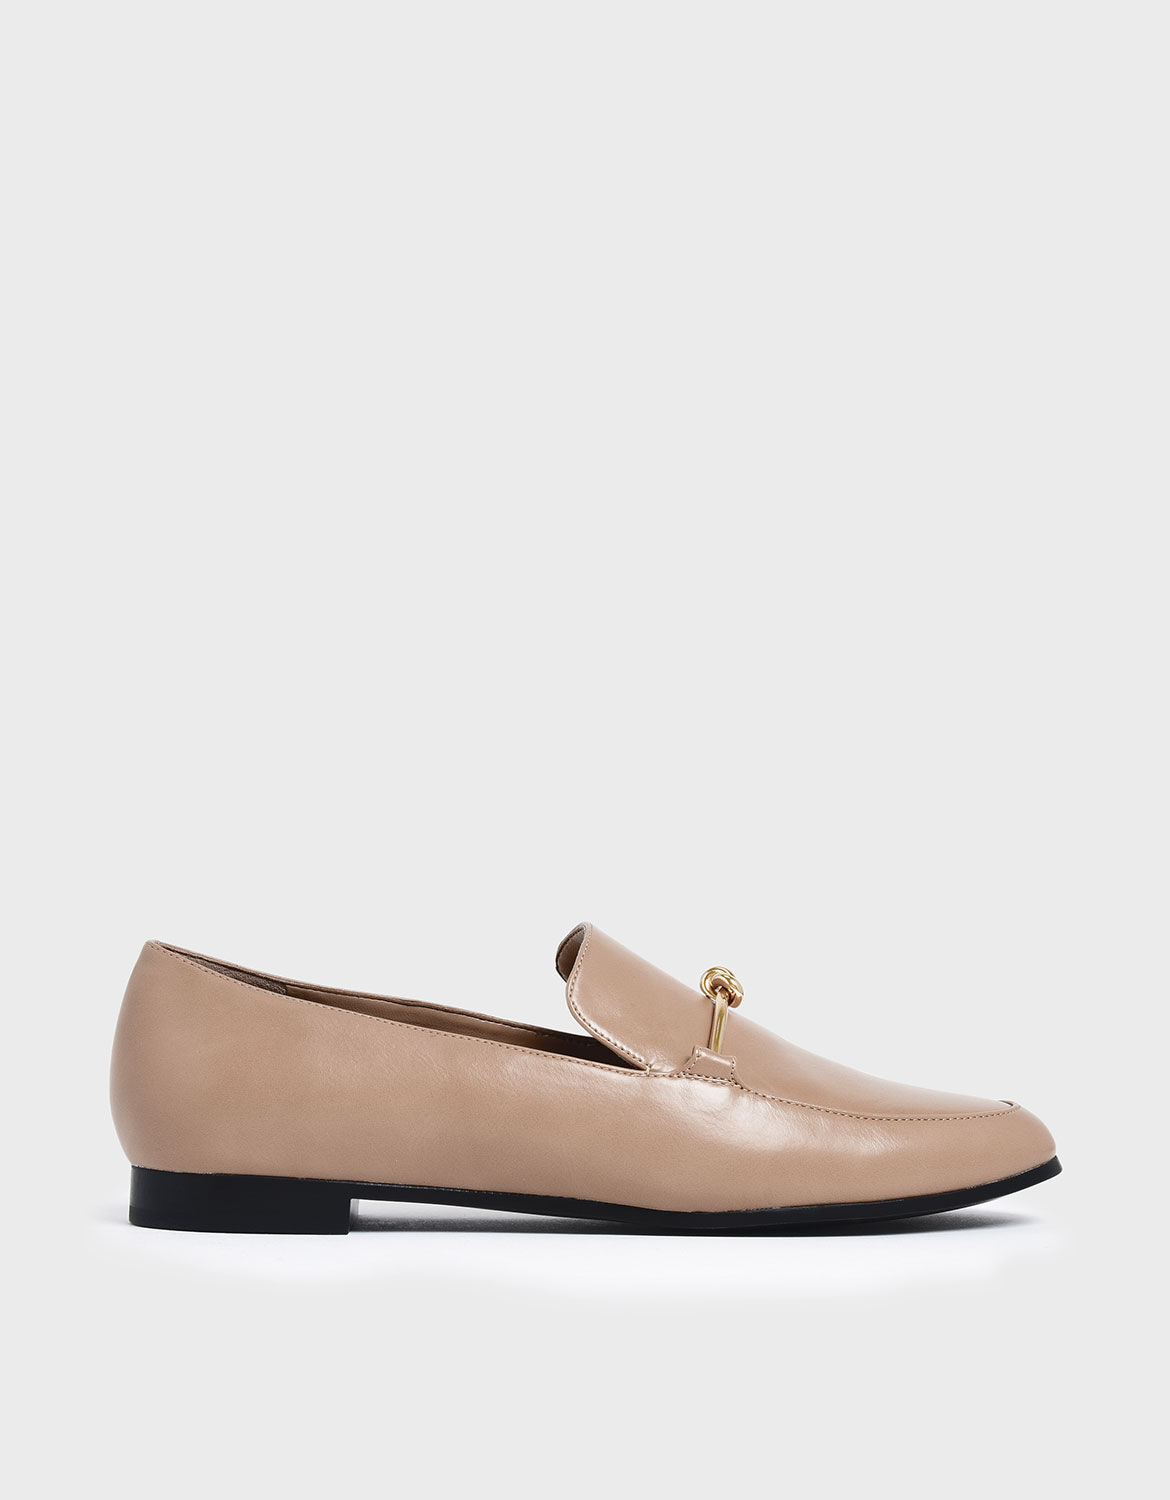 hulkende spiralformet eskalere Nude Metallic Knot Accent Loafers - CHARLES & KEITH TH